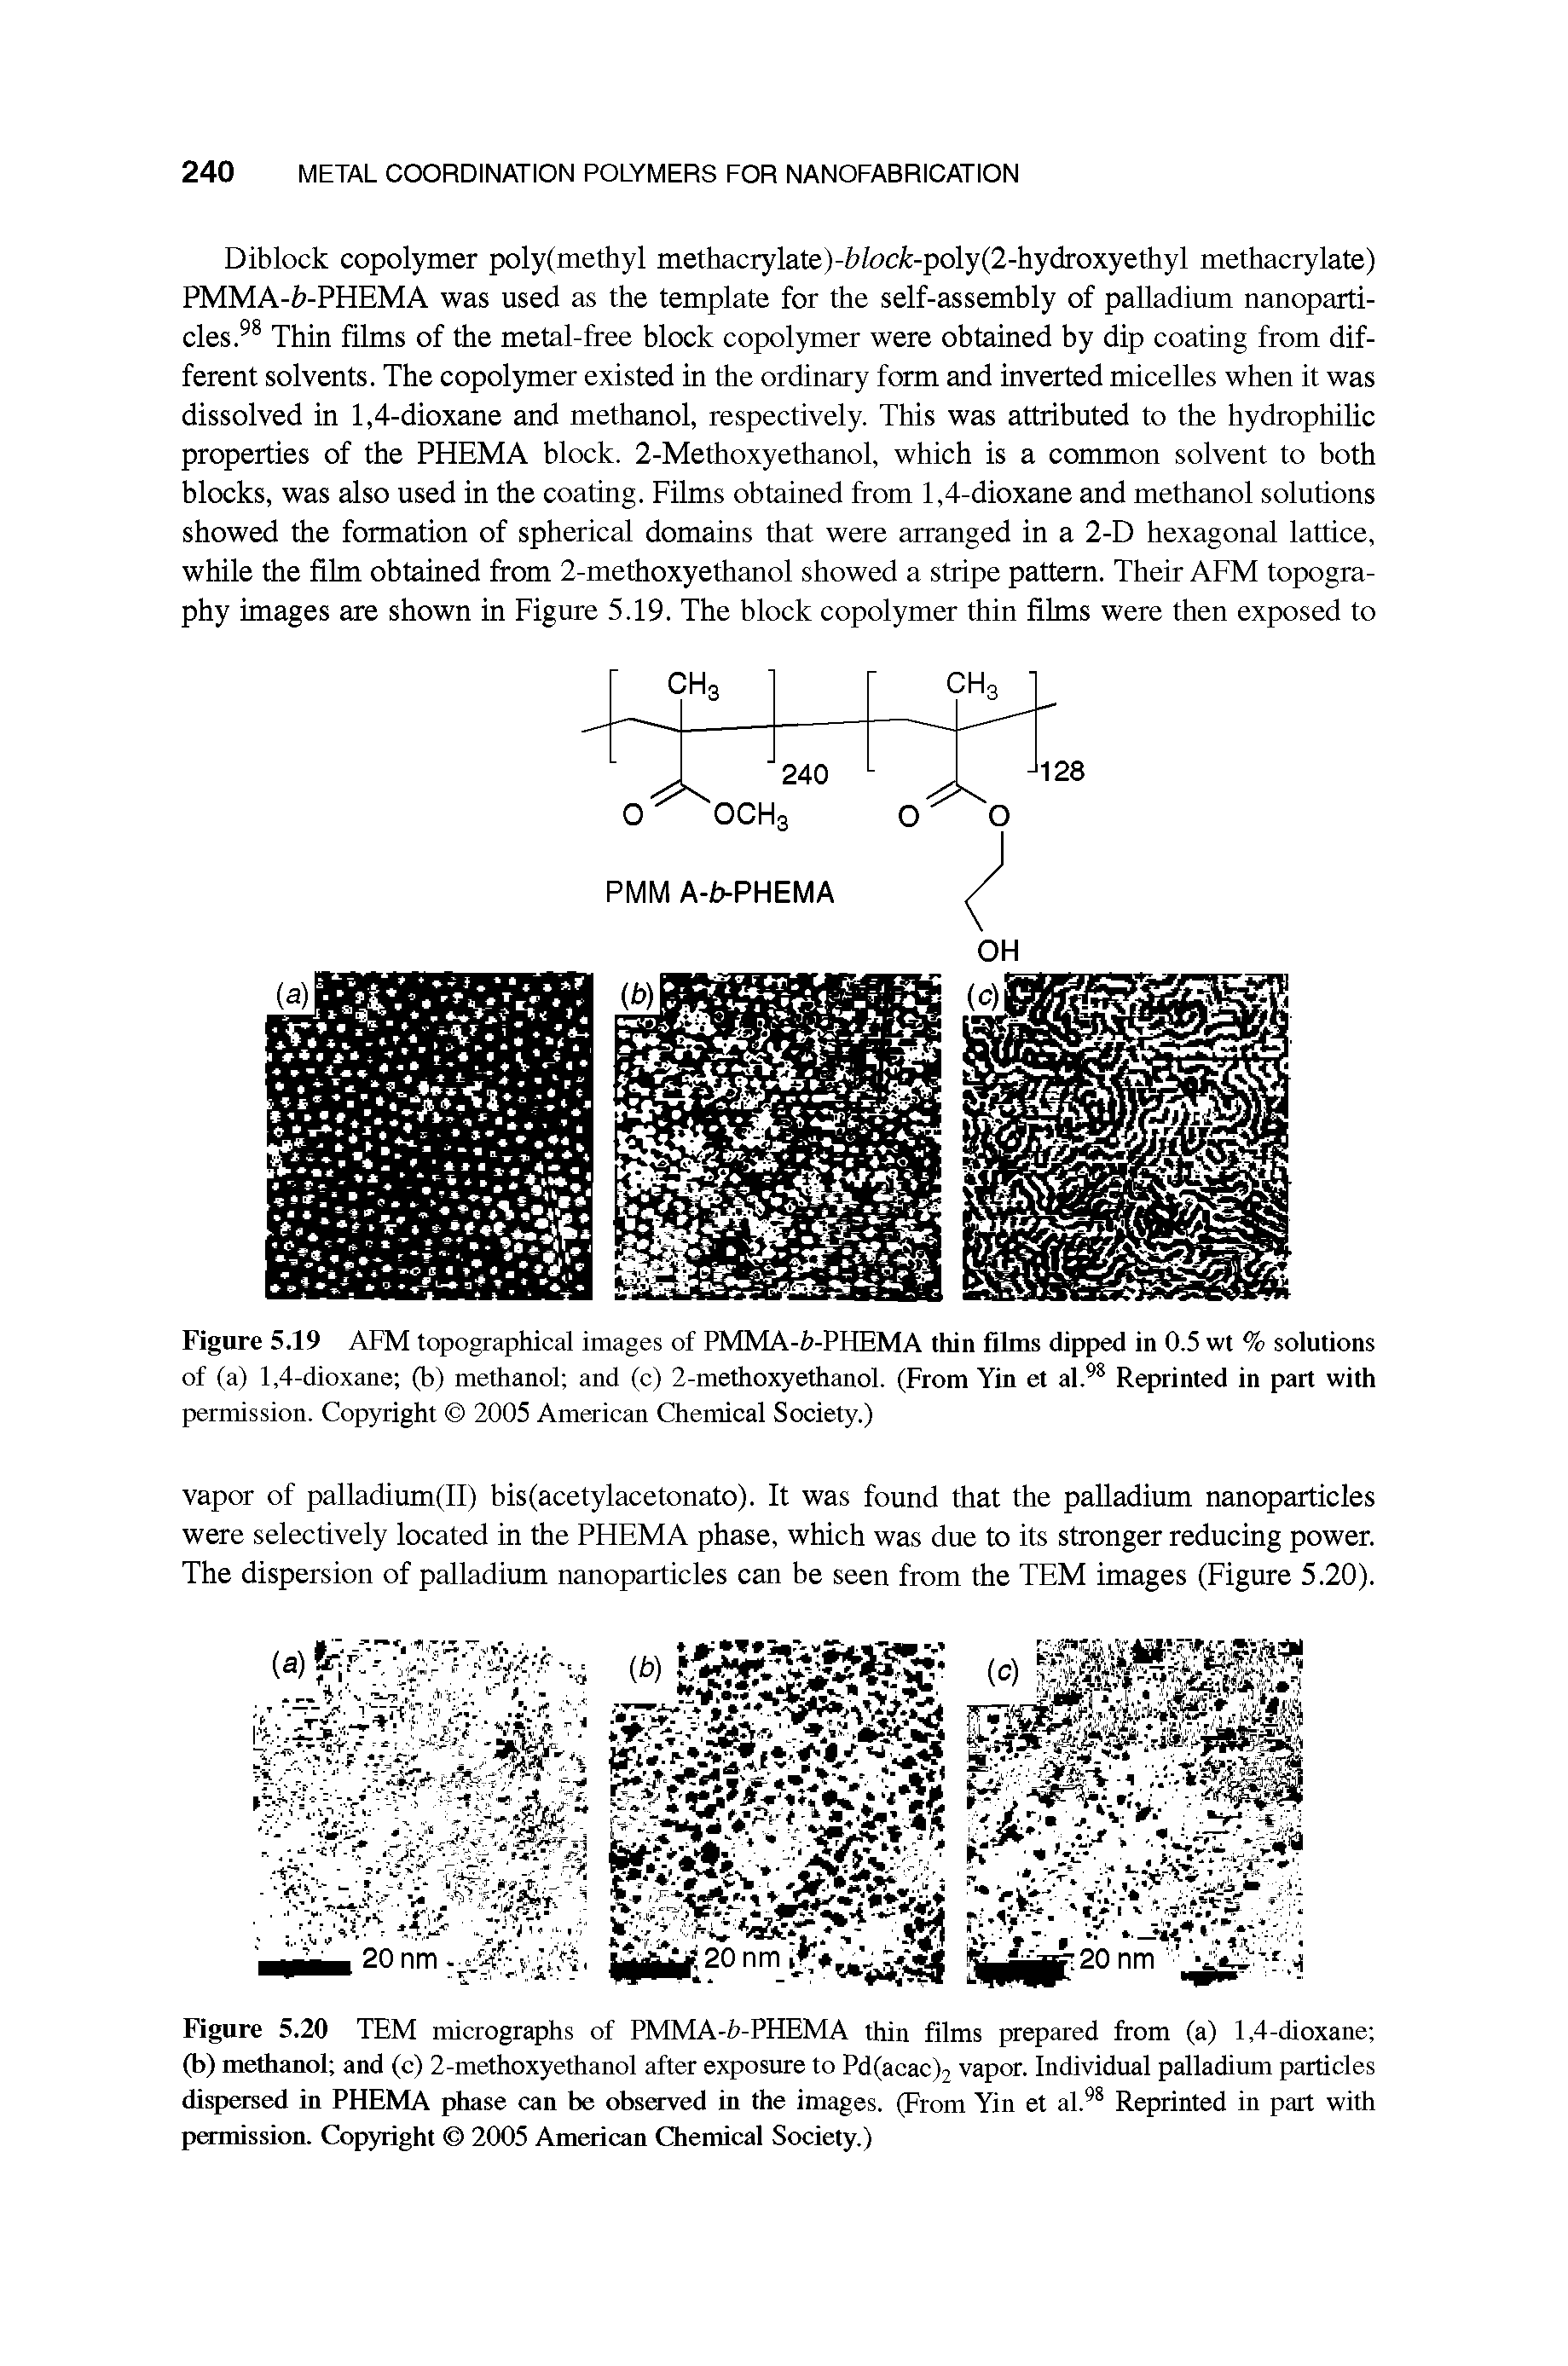 Figure 5.19 AFM topographical images of PMMA-h-PHEMA thin films dipped in 0.5 wt % solutions of (a) 1,4-dioxane (b) methanol and (c) 2-methoxyethanol. (From Yin et al.98 Reprinted in part with permission. Copyright 2005 American Chemical Society.)...